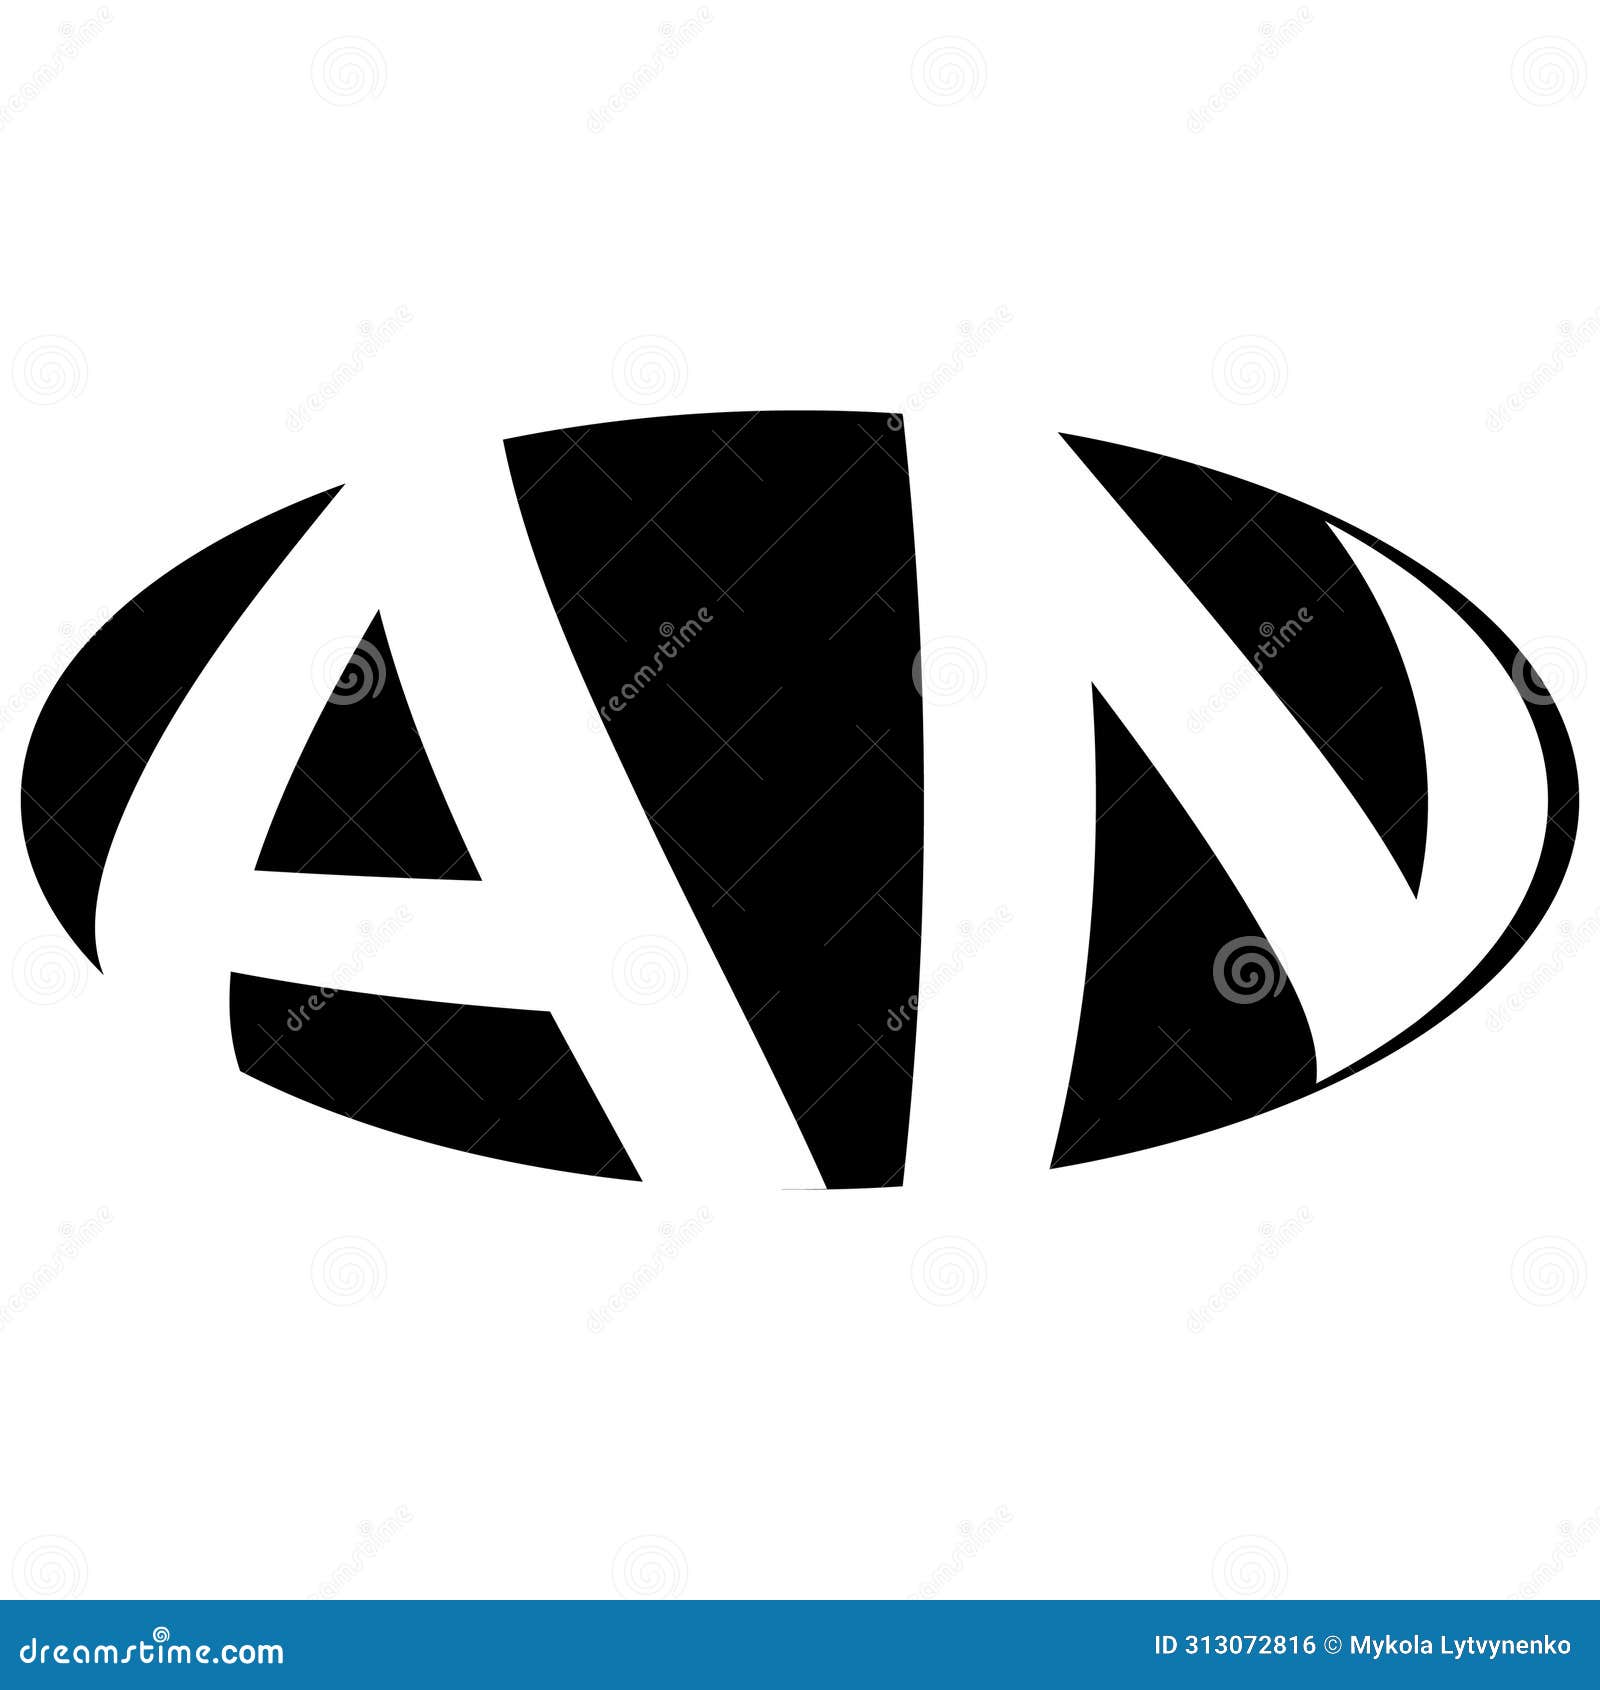 oval logo double letter a, n two letters an na